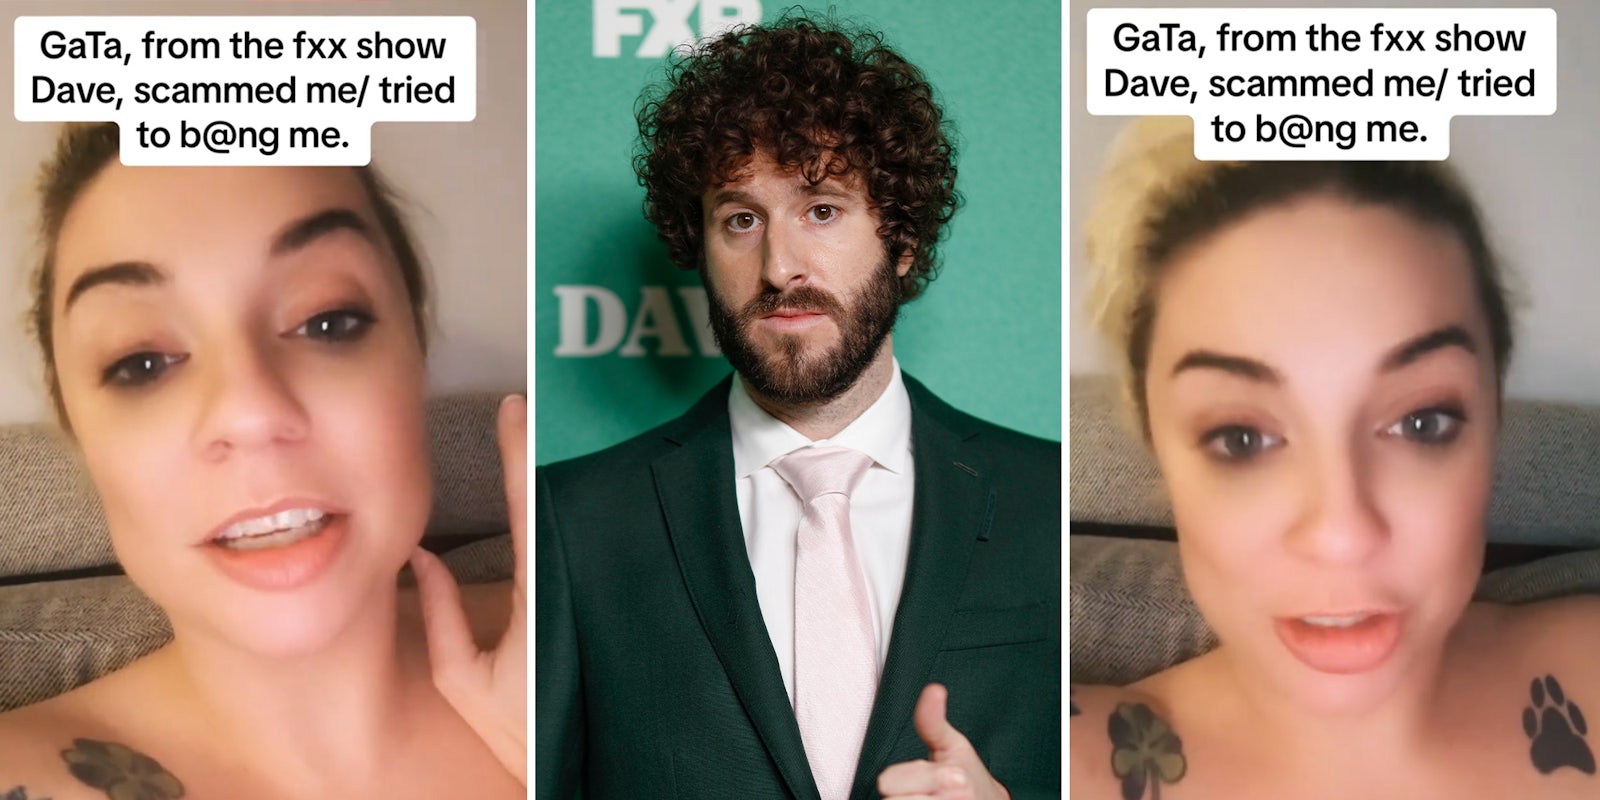 Woman says she was 'scammed' out of thousands by Lil Dicky's best friend and co-star